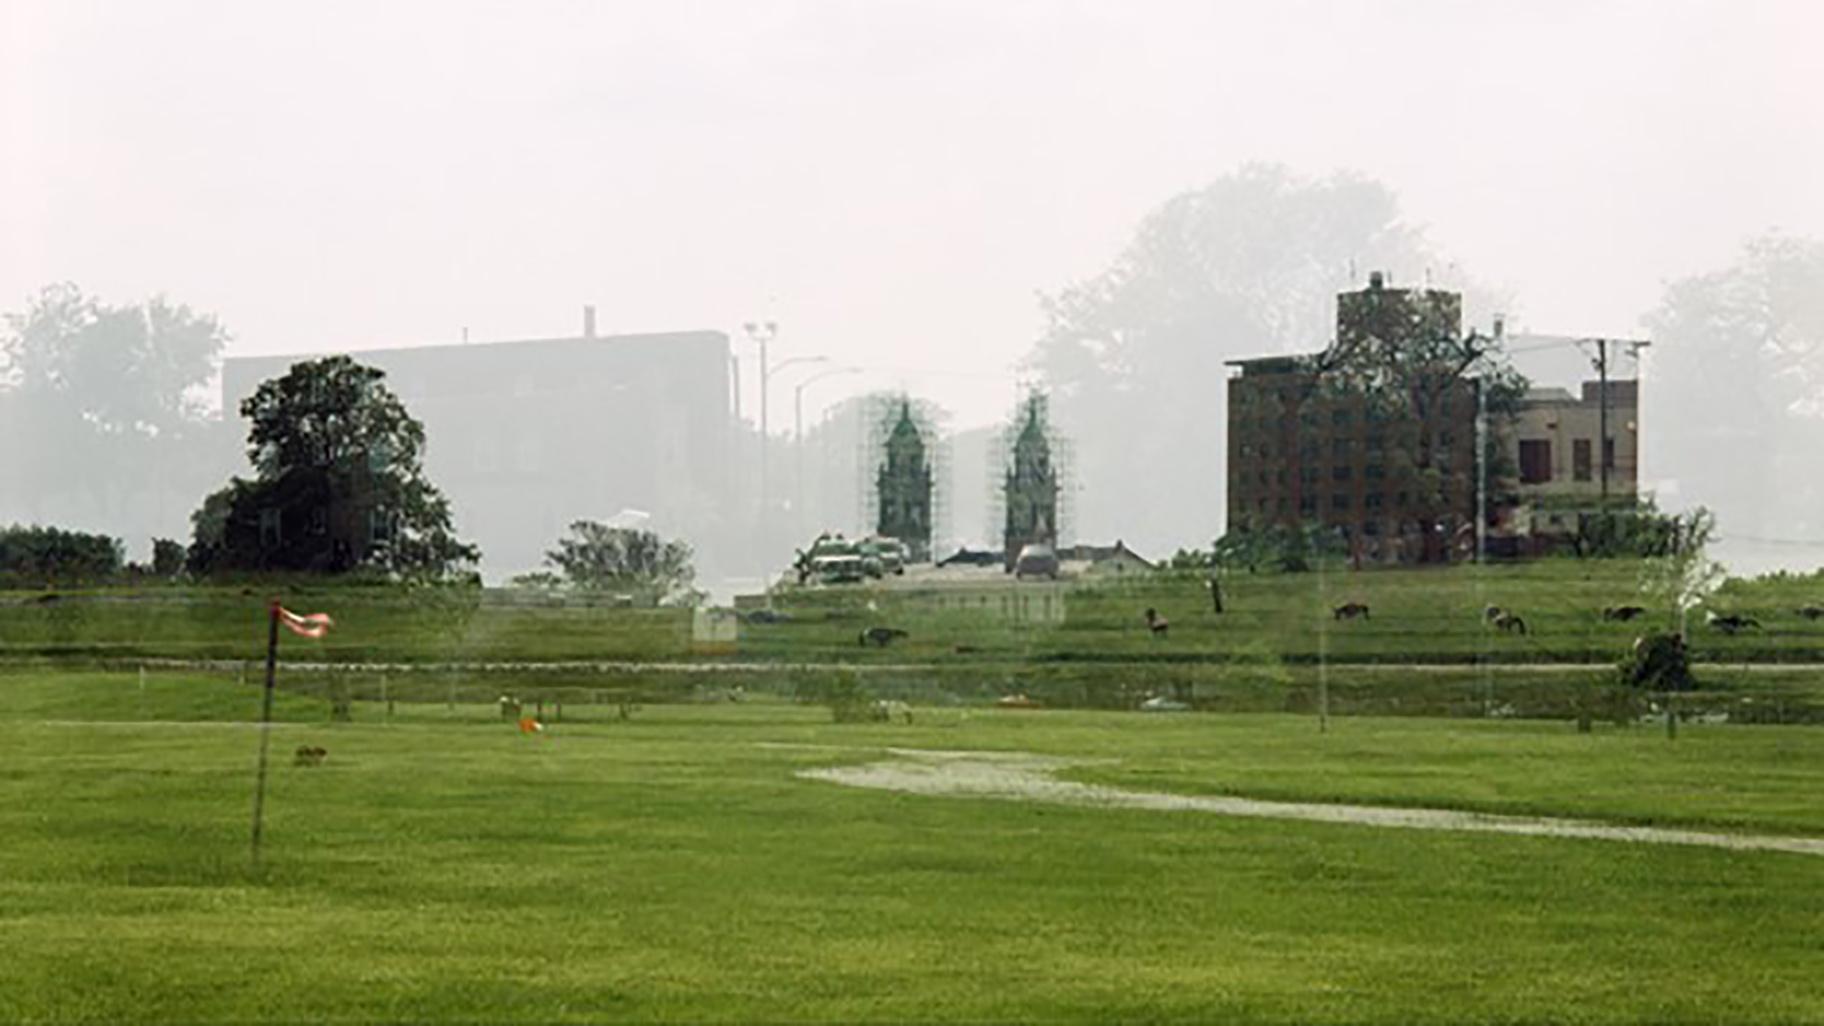 A double exposure of the former Abbott Homes site (Alexander Gouletas / special to ProPublica)